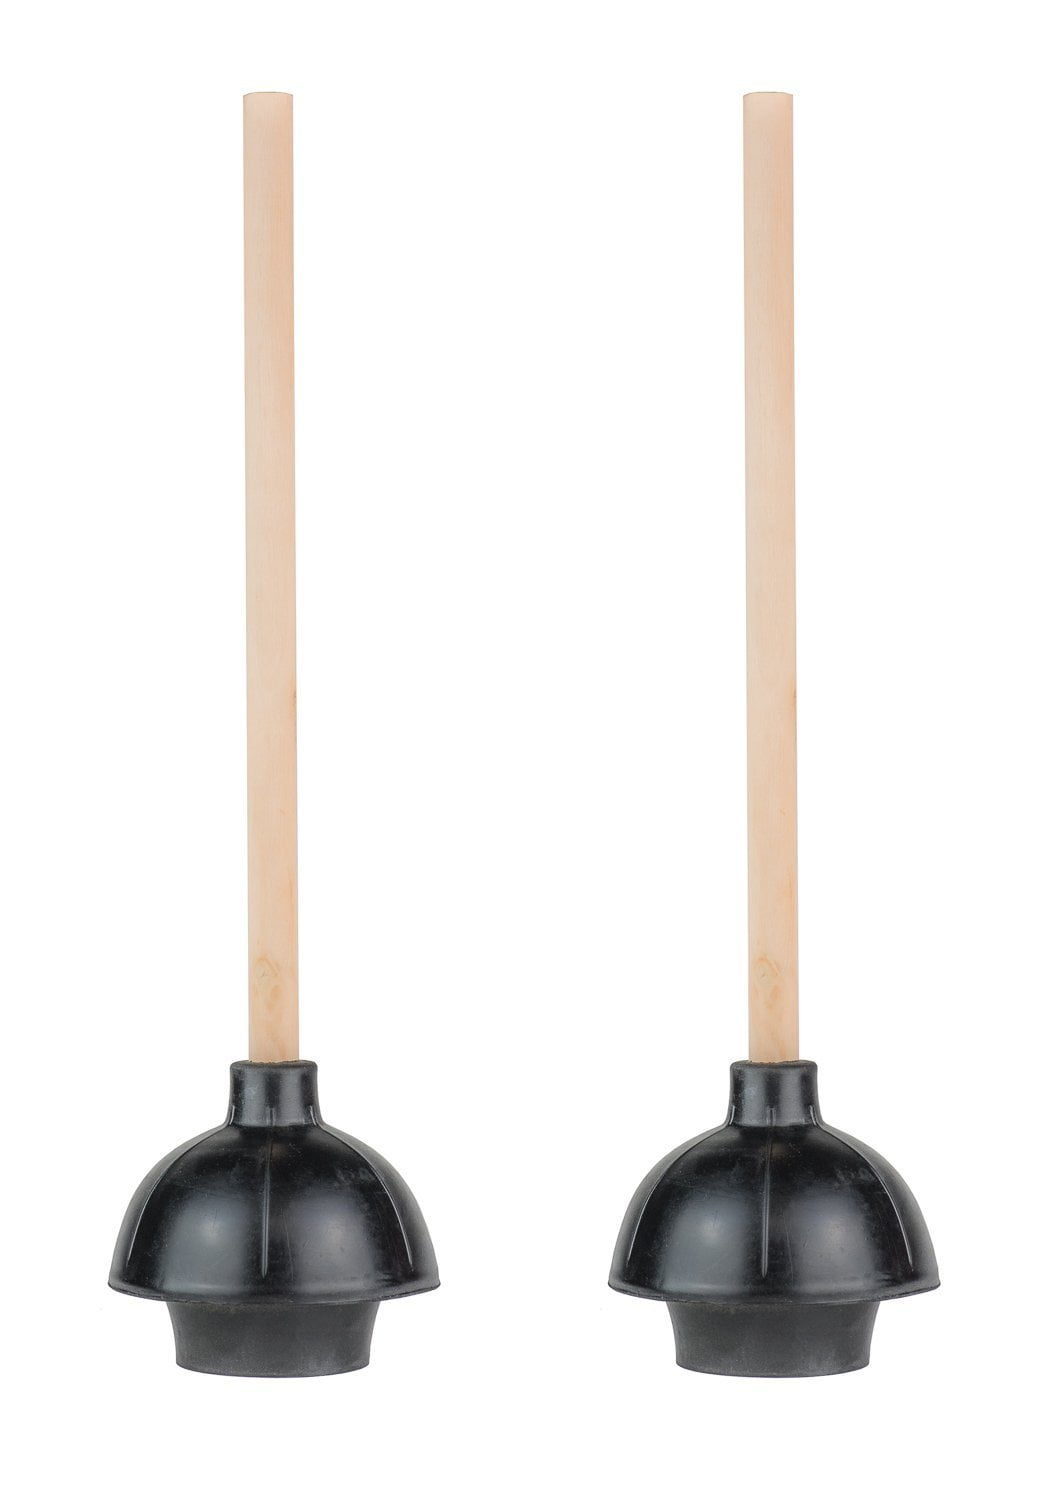 Pack of 2 Commercial Grade with 18” Wood Handle SteadMax Rubber Toilet Plunger Heavy Duty Double Thrust Force Cup 